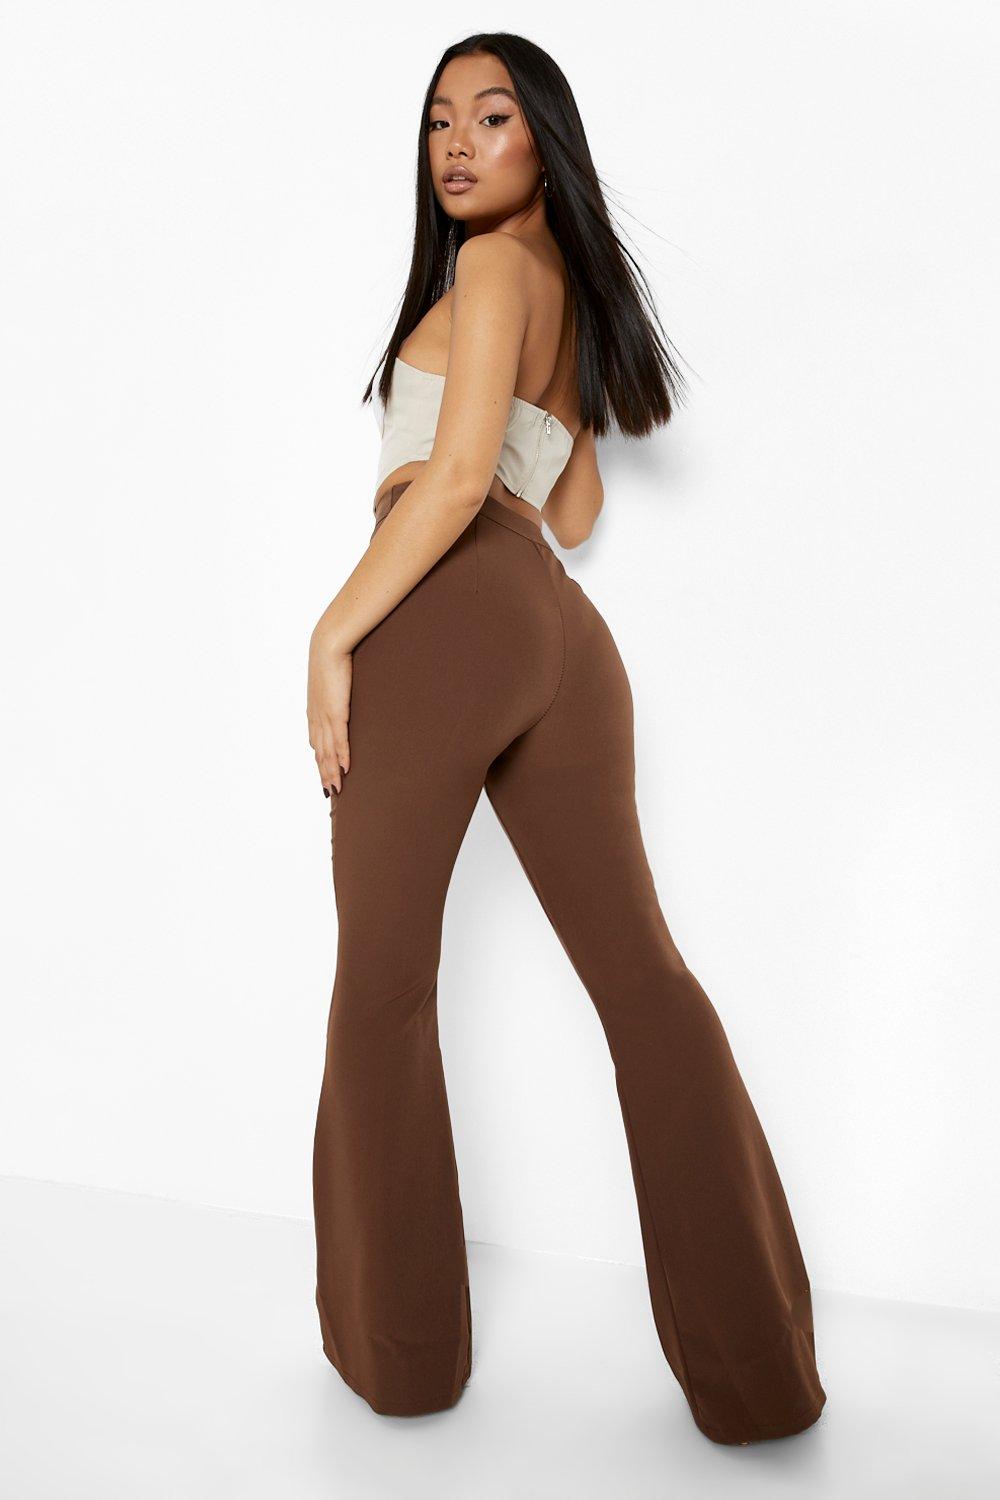 Brown Belted Flare Trousers